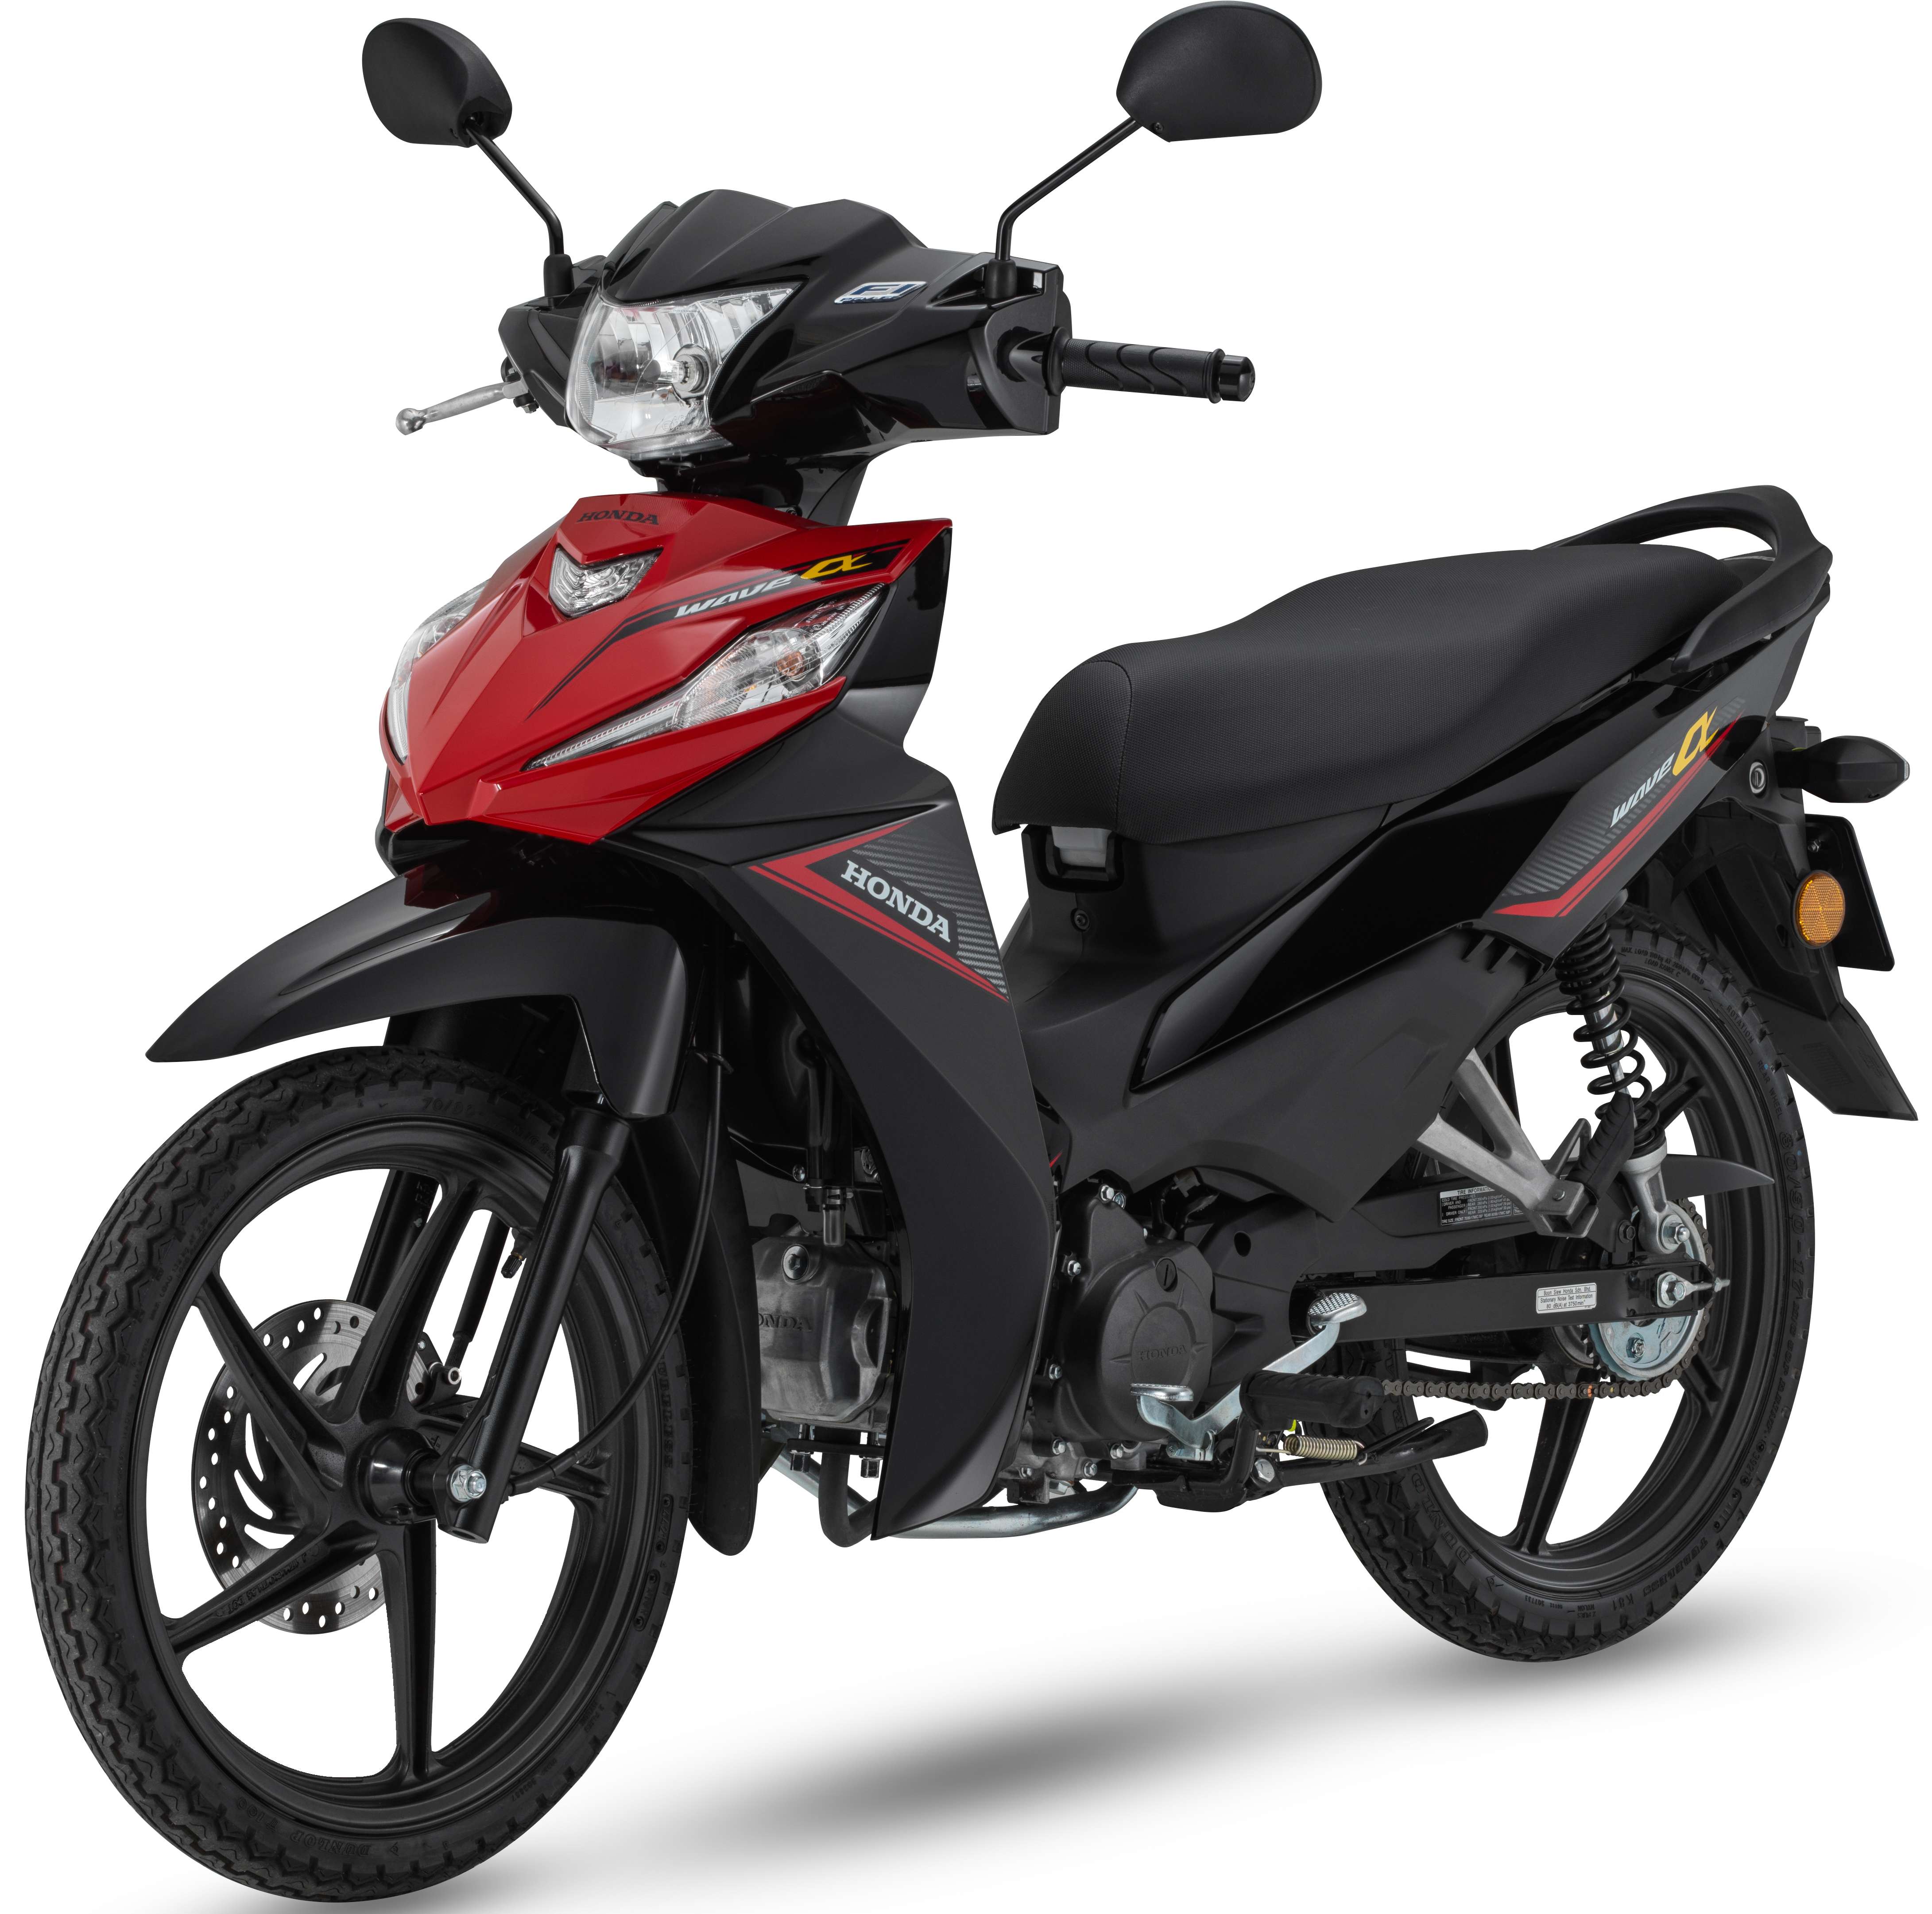 2023 Honda Wave Alpha updated for Malaysia now with EFI, larger 4.1